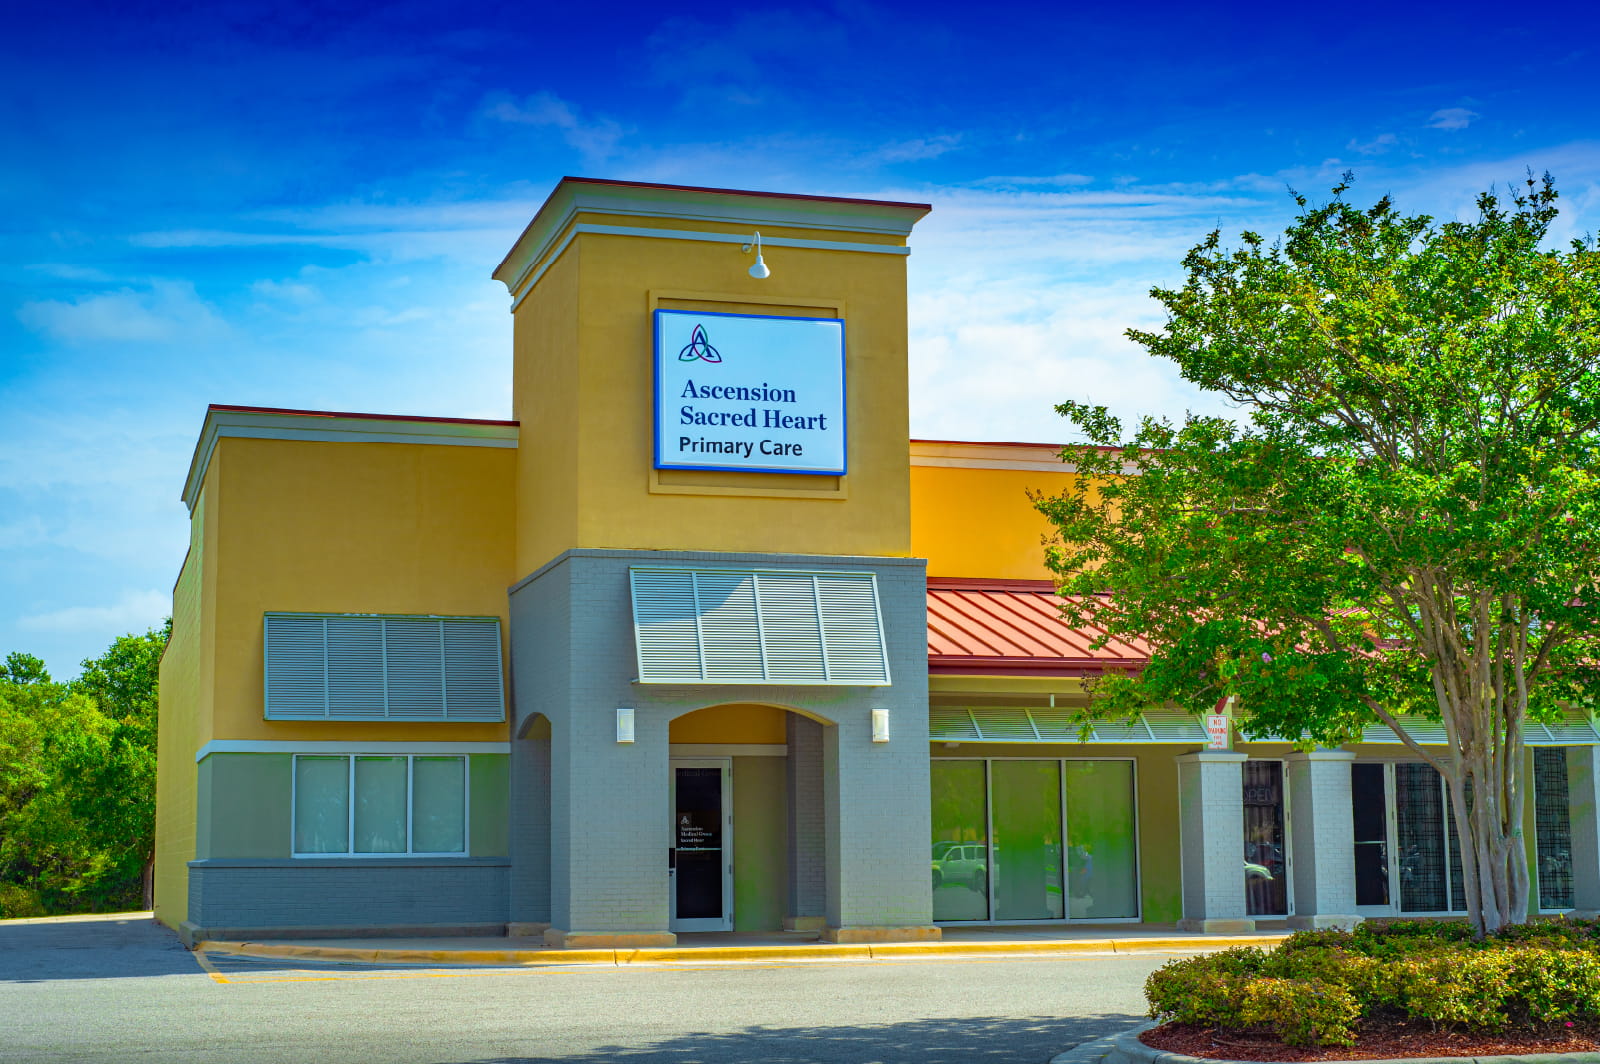 Ascension Sacred Heart Primary Care Ocean Park